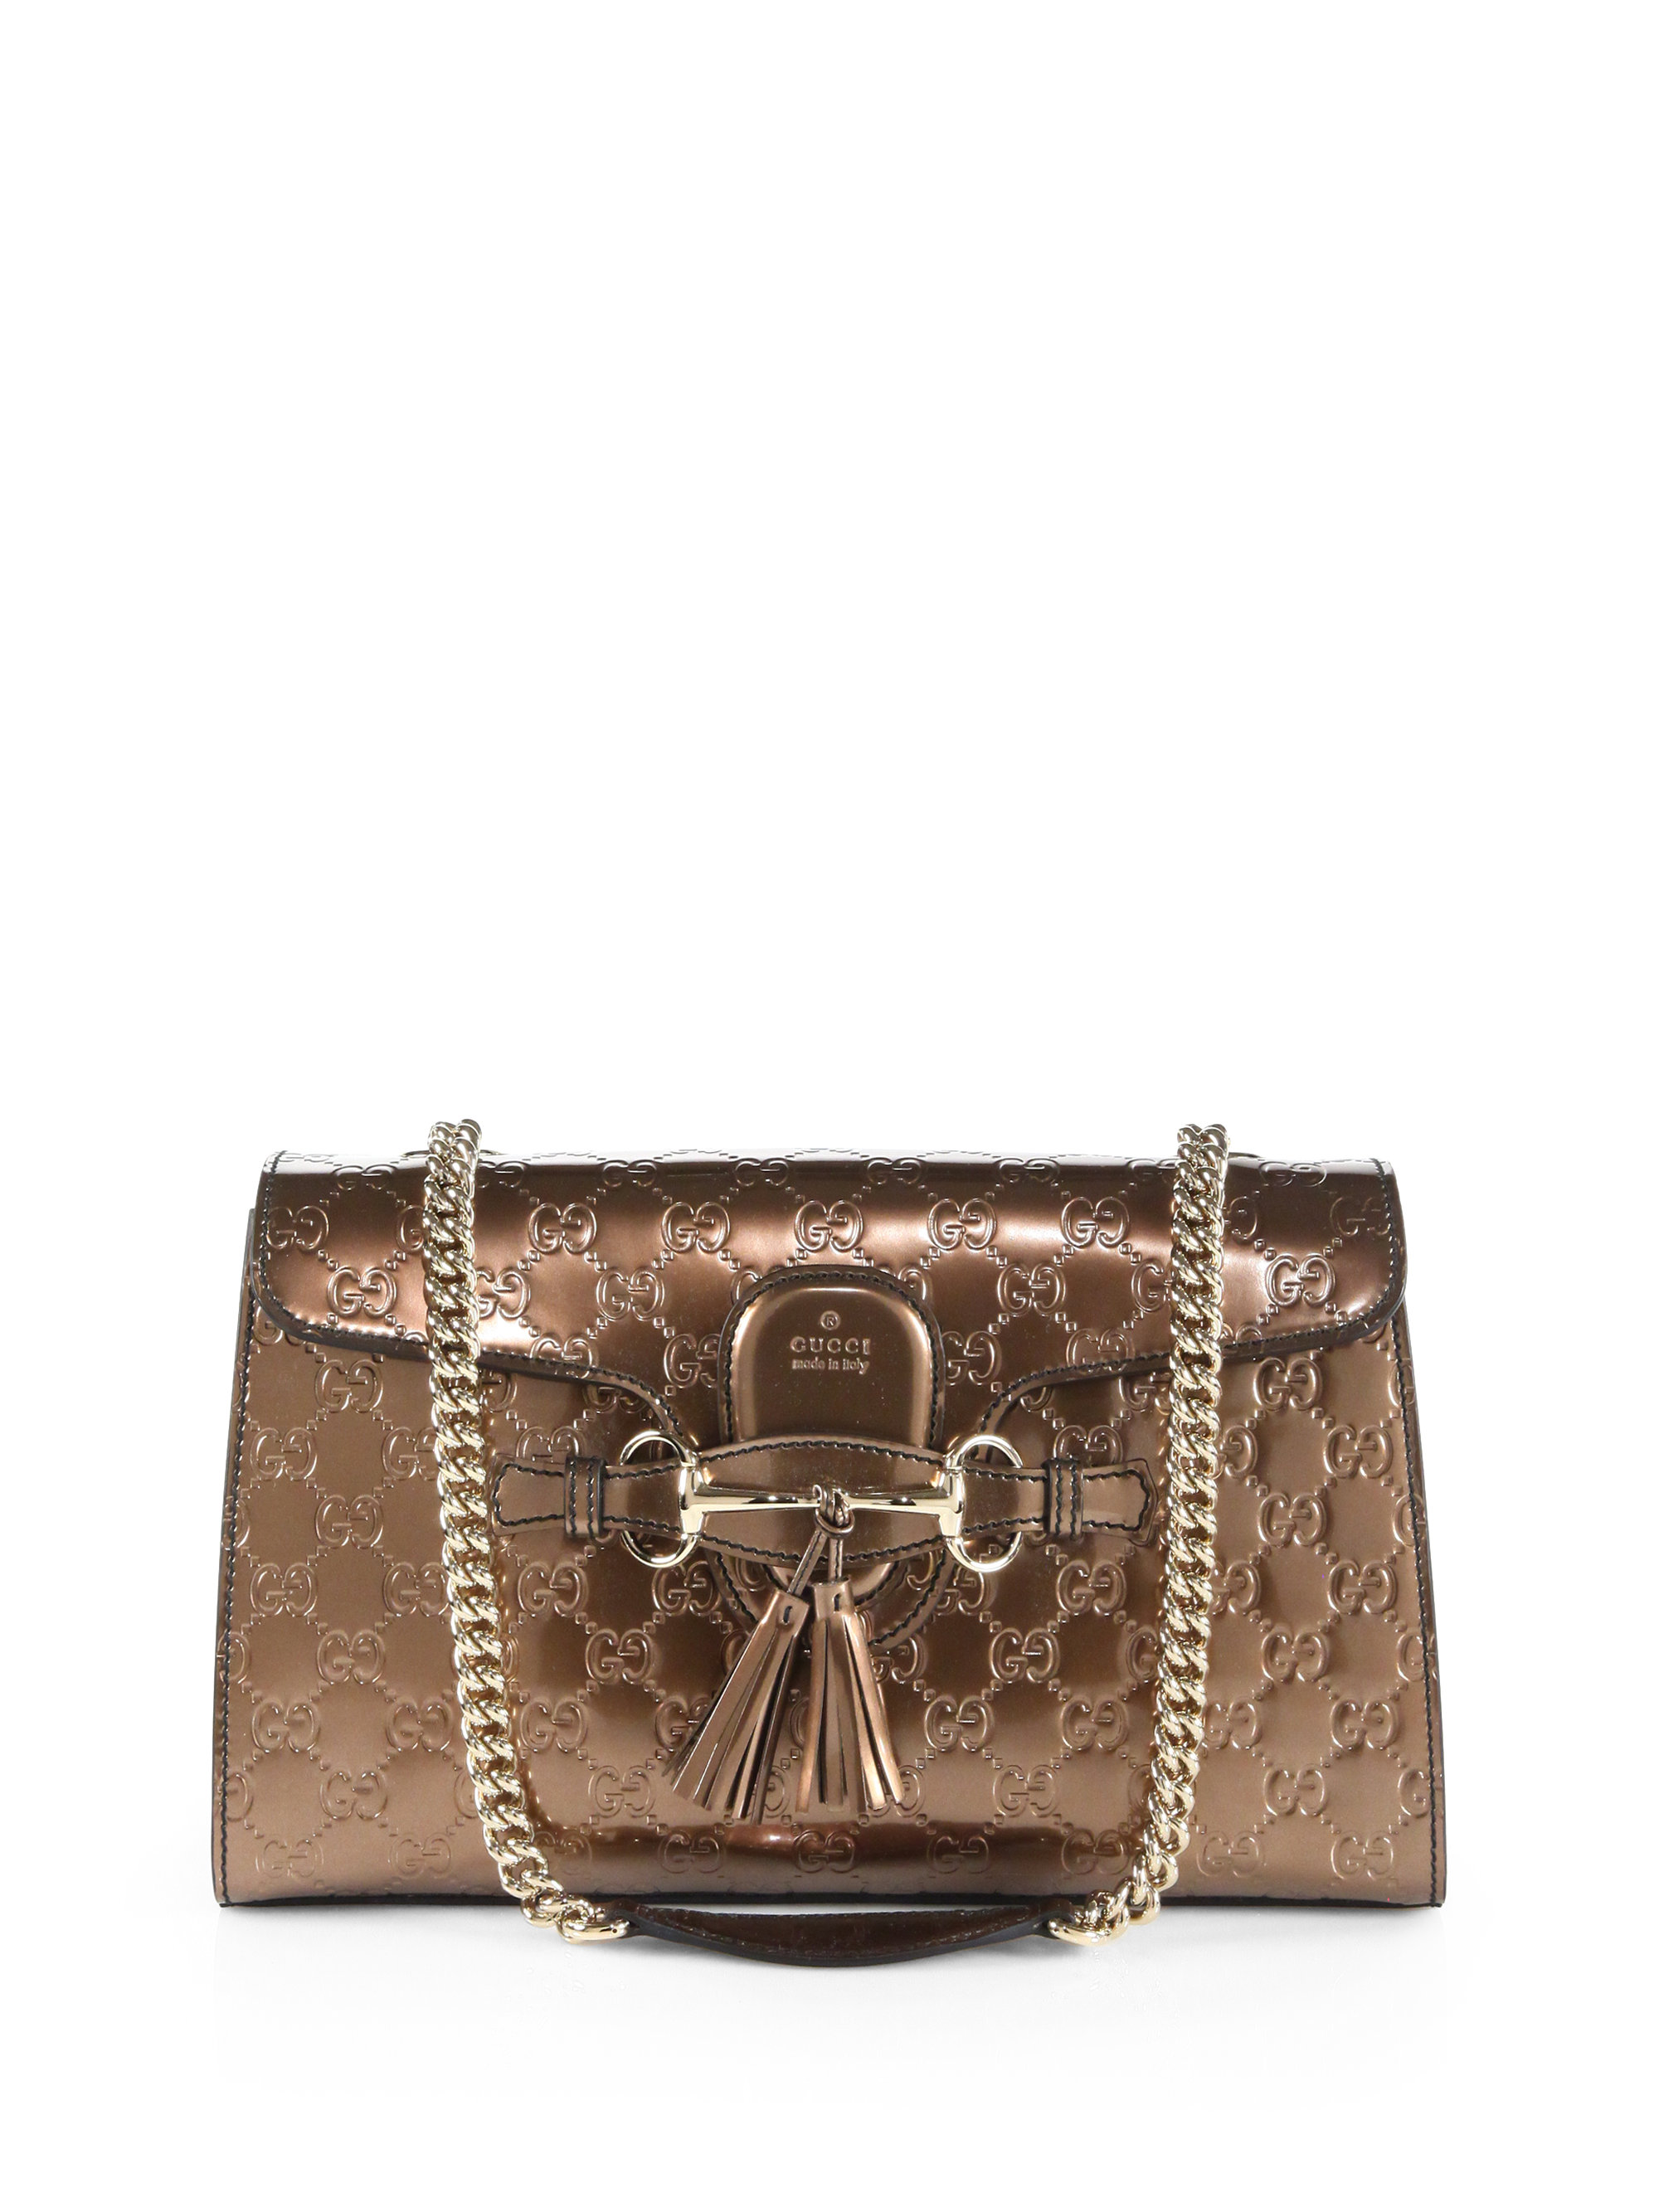 Gucci Emily Shine Ssima Leather Chain Shoulder Bag in Brown - Lyst